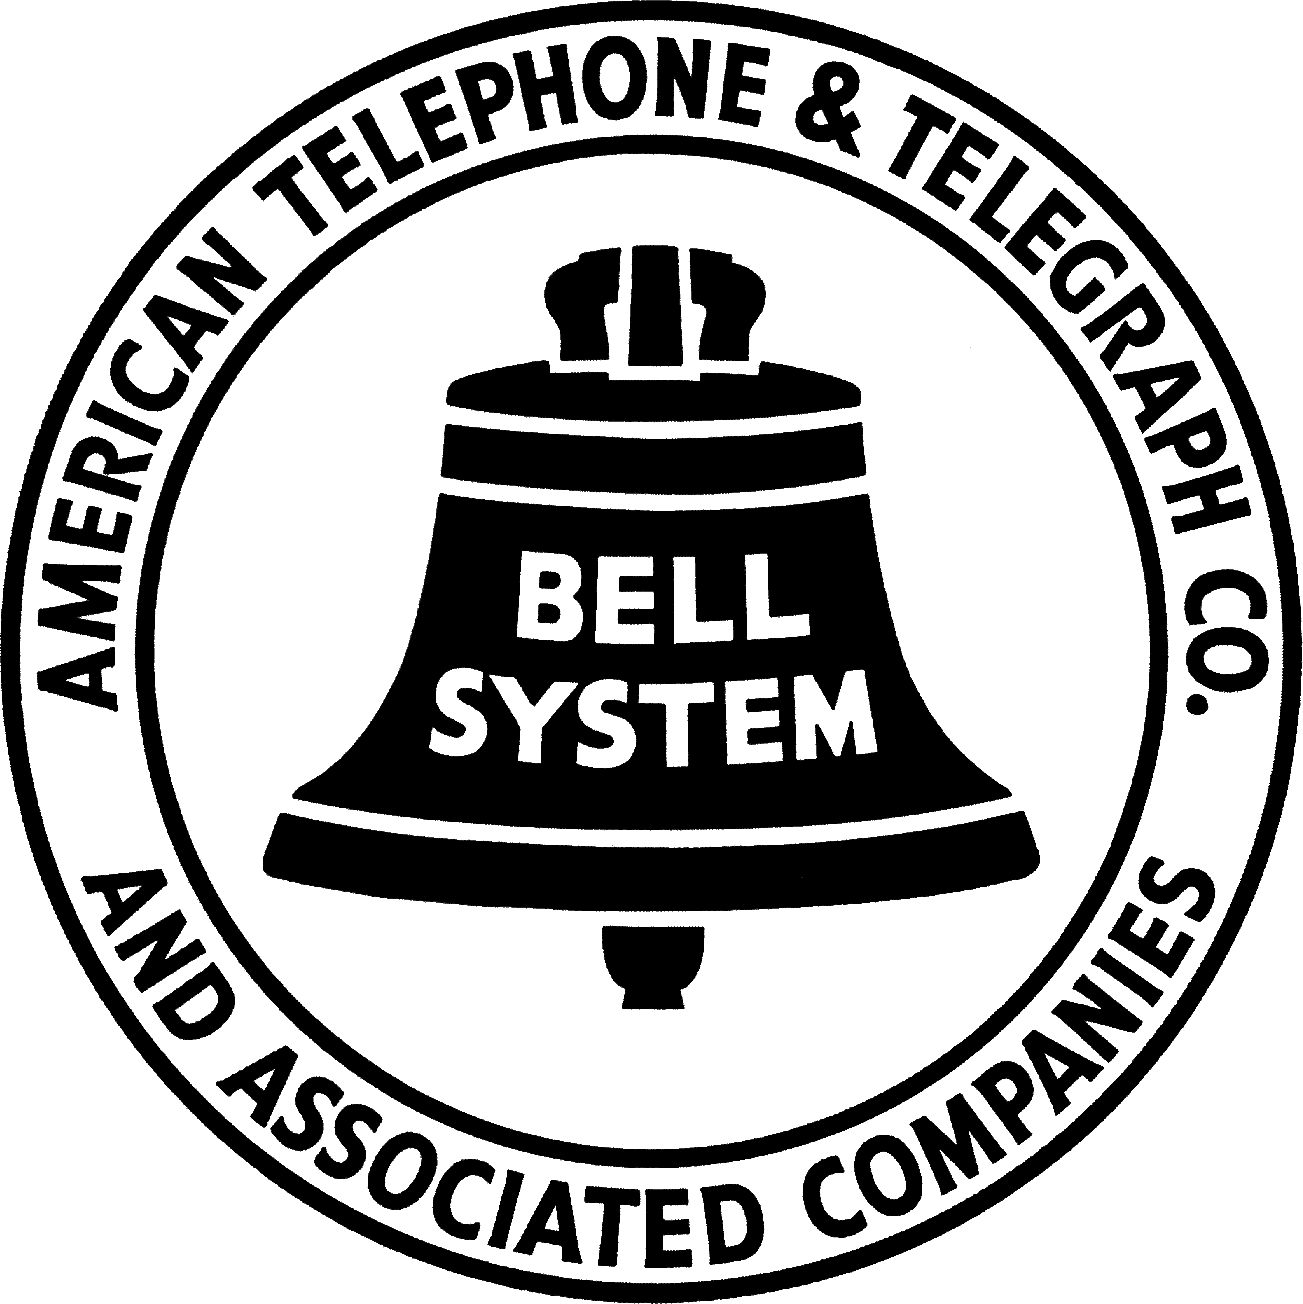 Old Phone Logo - Bell Telephone Company | Bell System | Telephone, Belle, Old phone